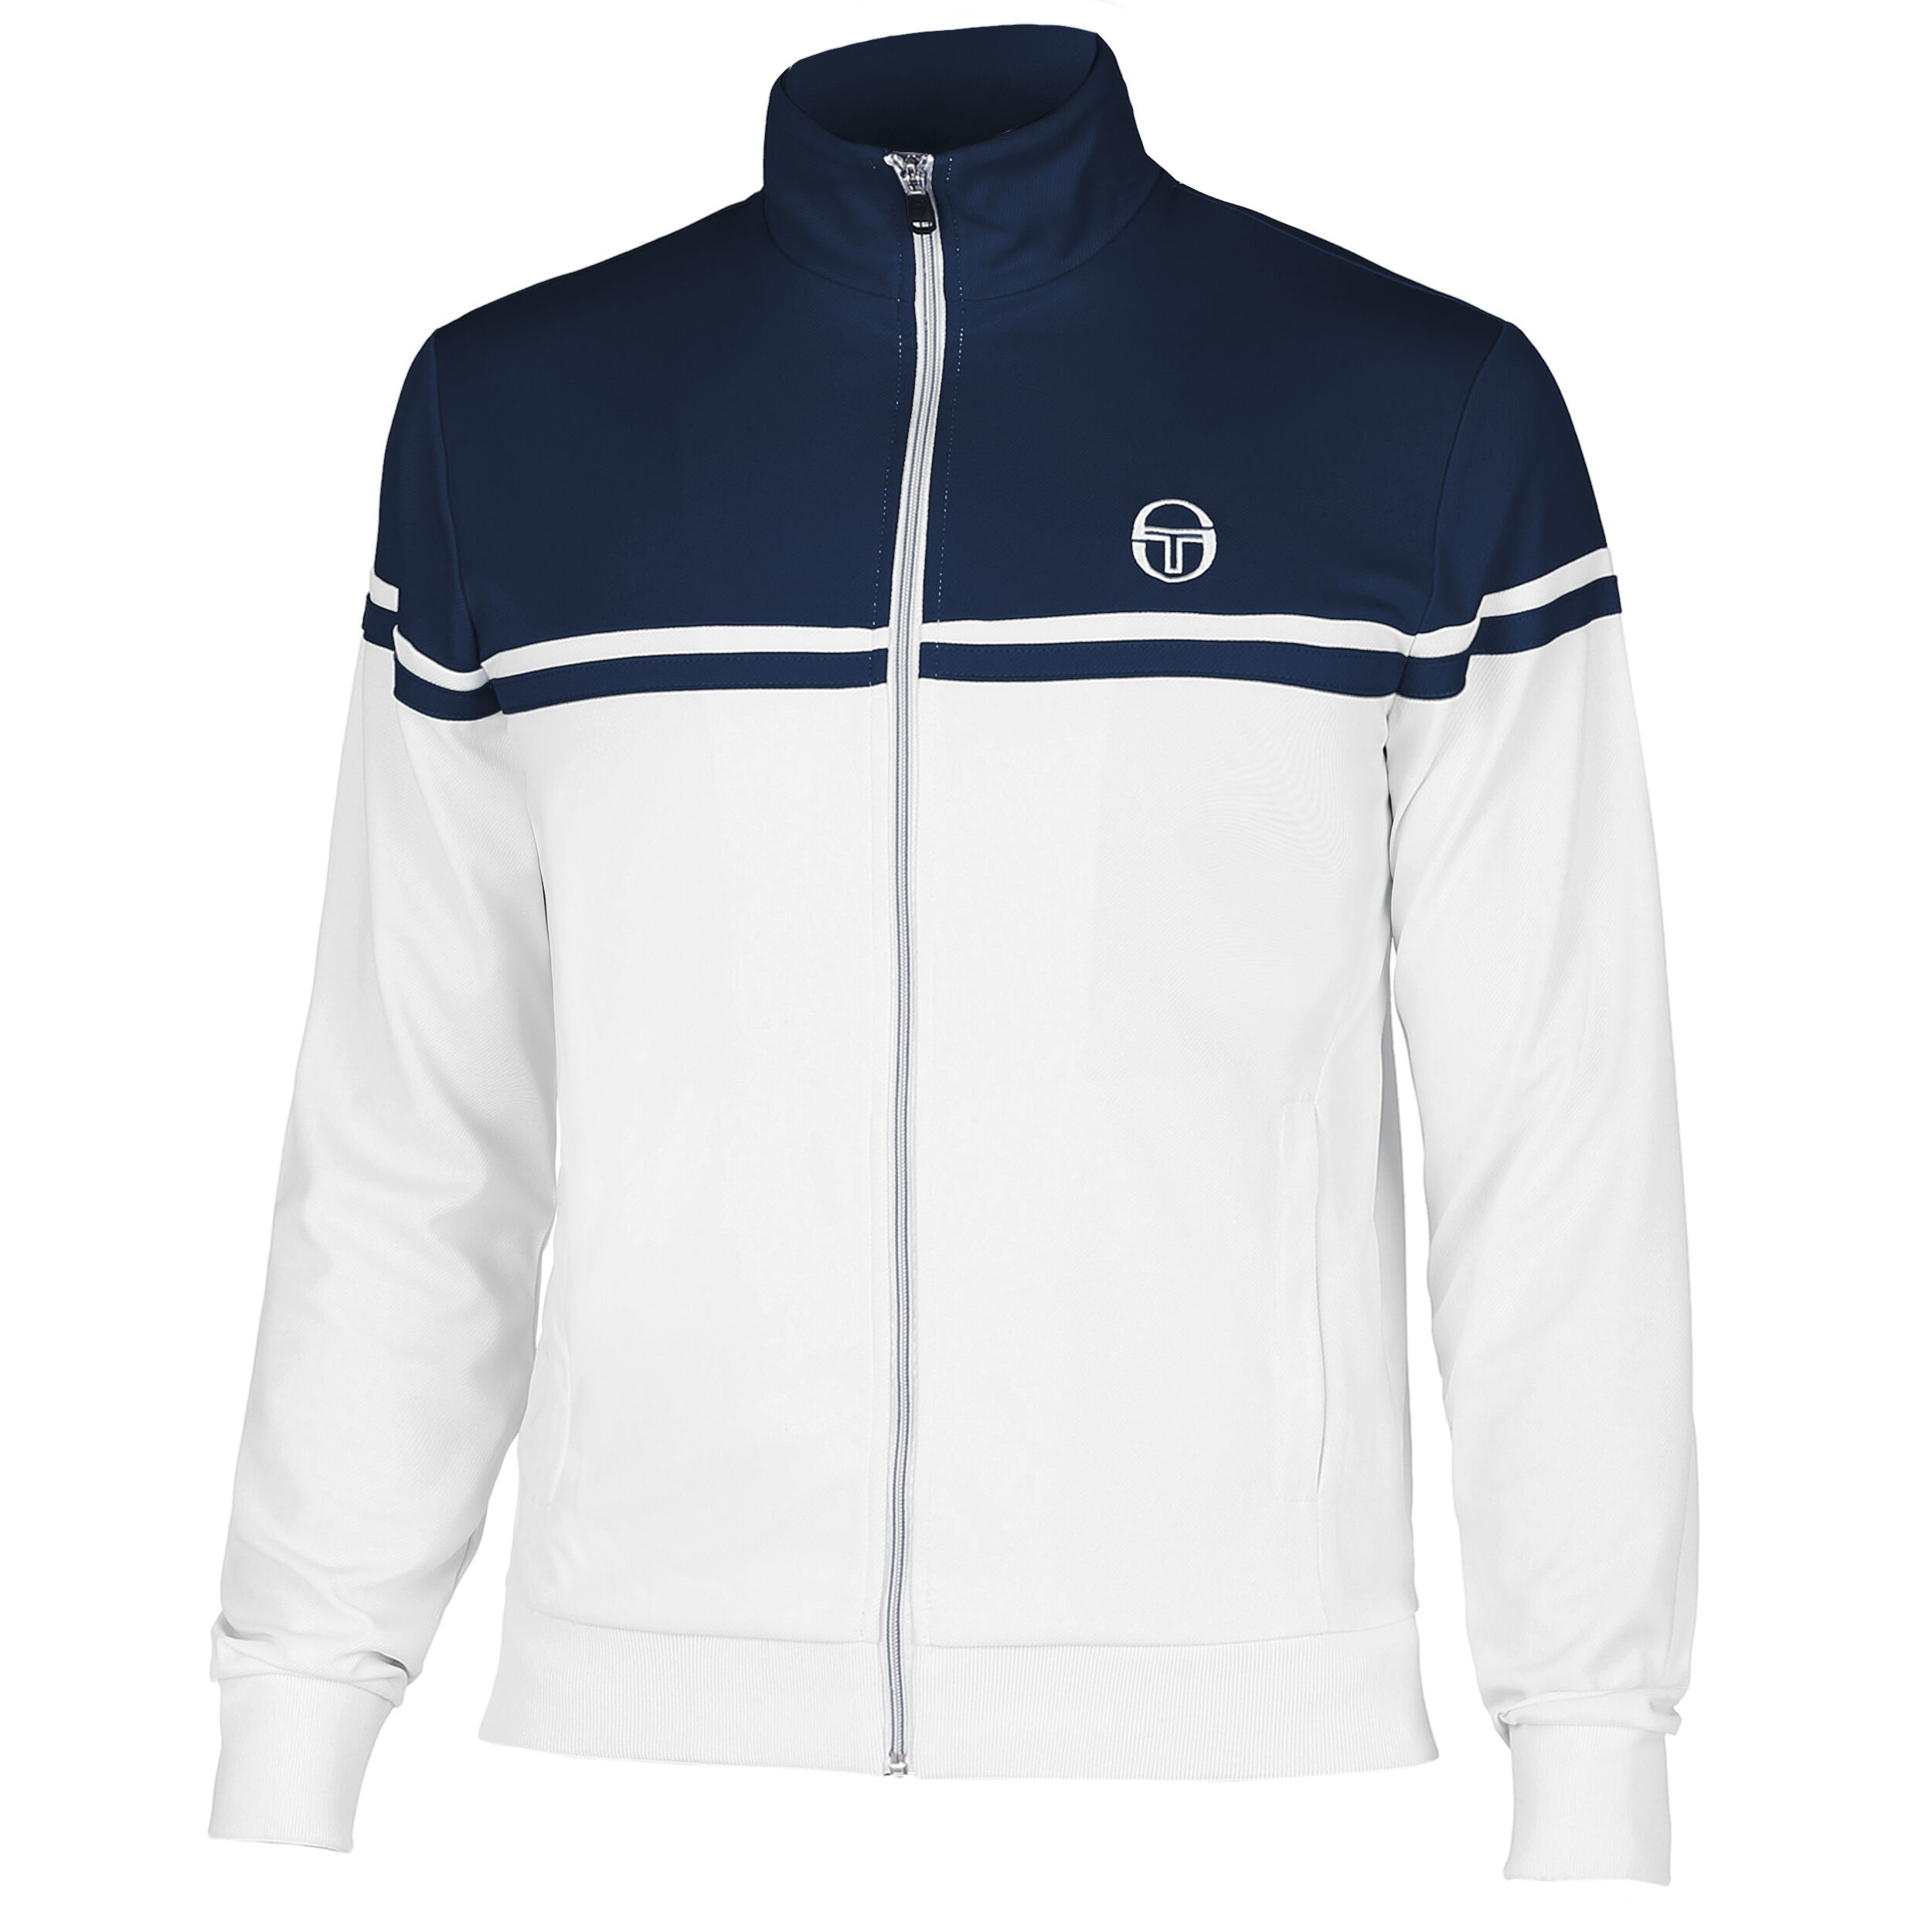 Details about   Sergio Tacchini New Young Line Track Top BNWT White & Navy 